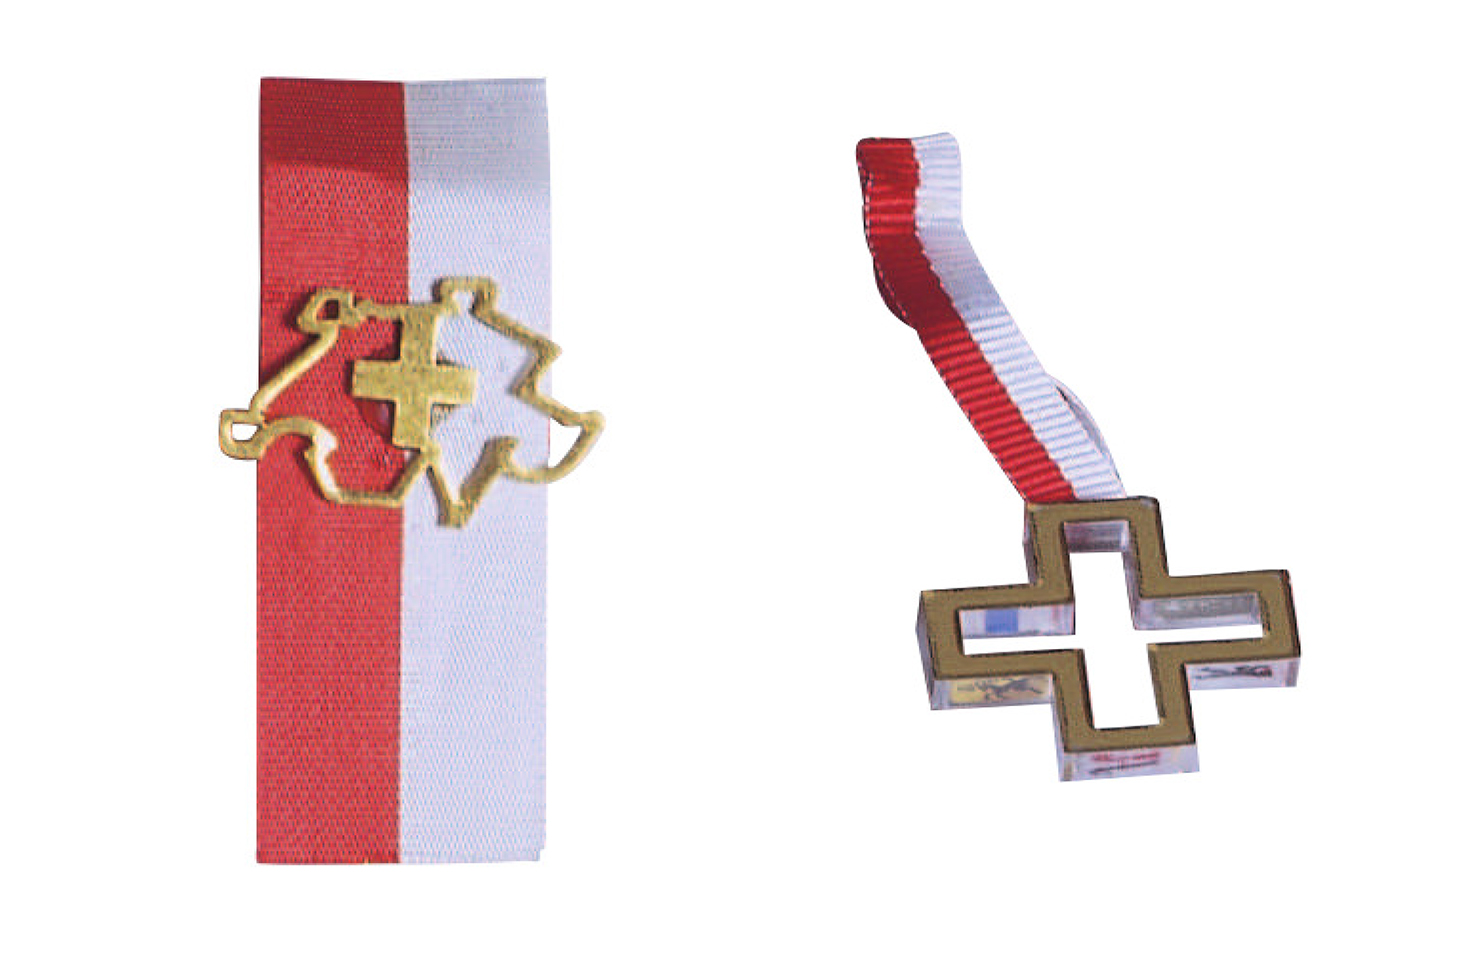 2 red and white emblems with a metal cross and the other a metal outline of Switzerland